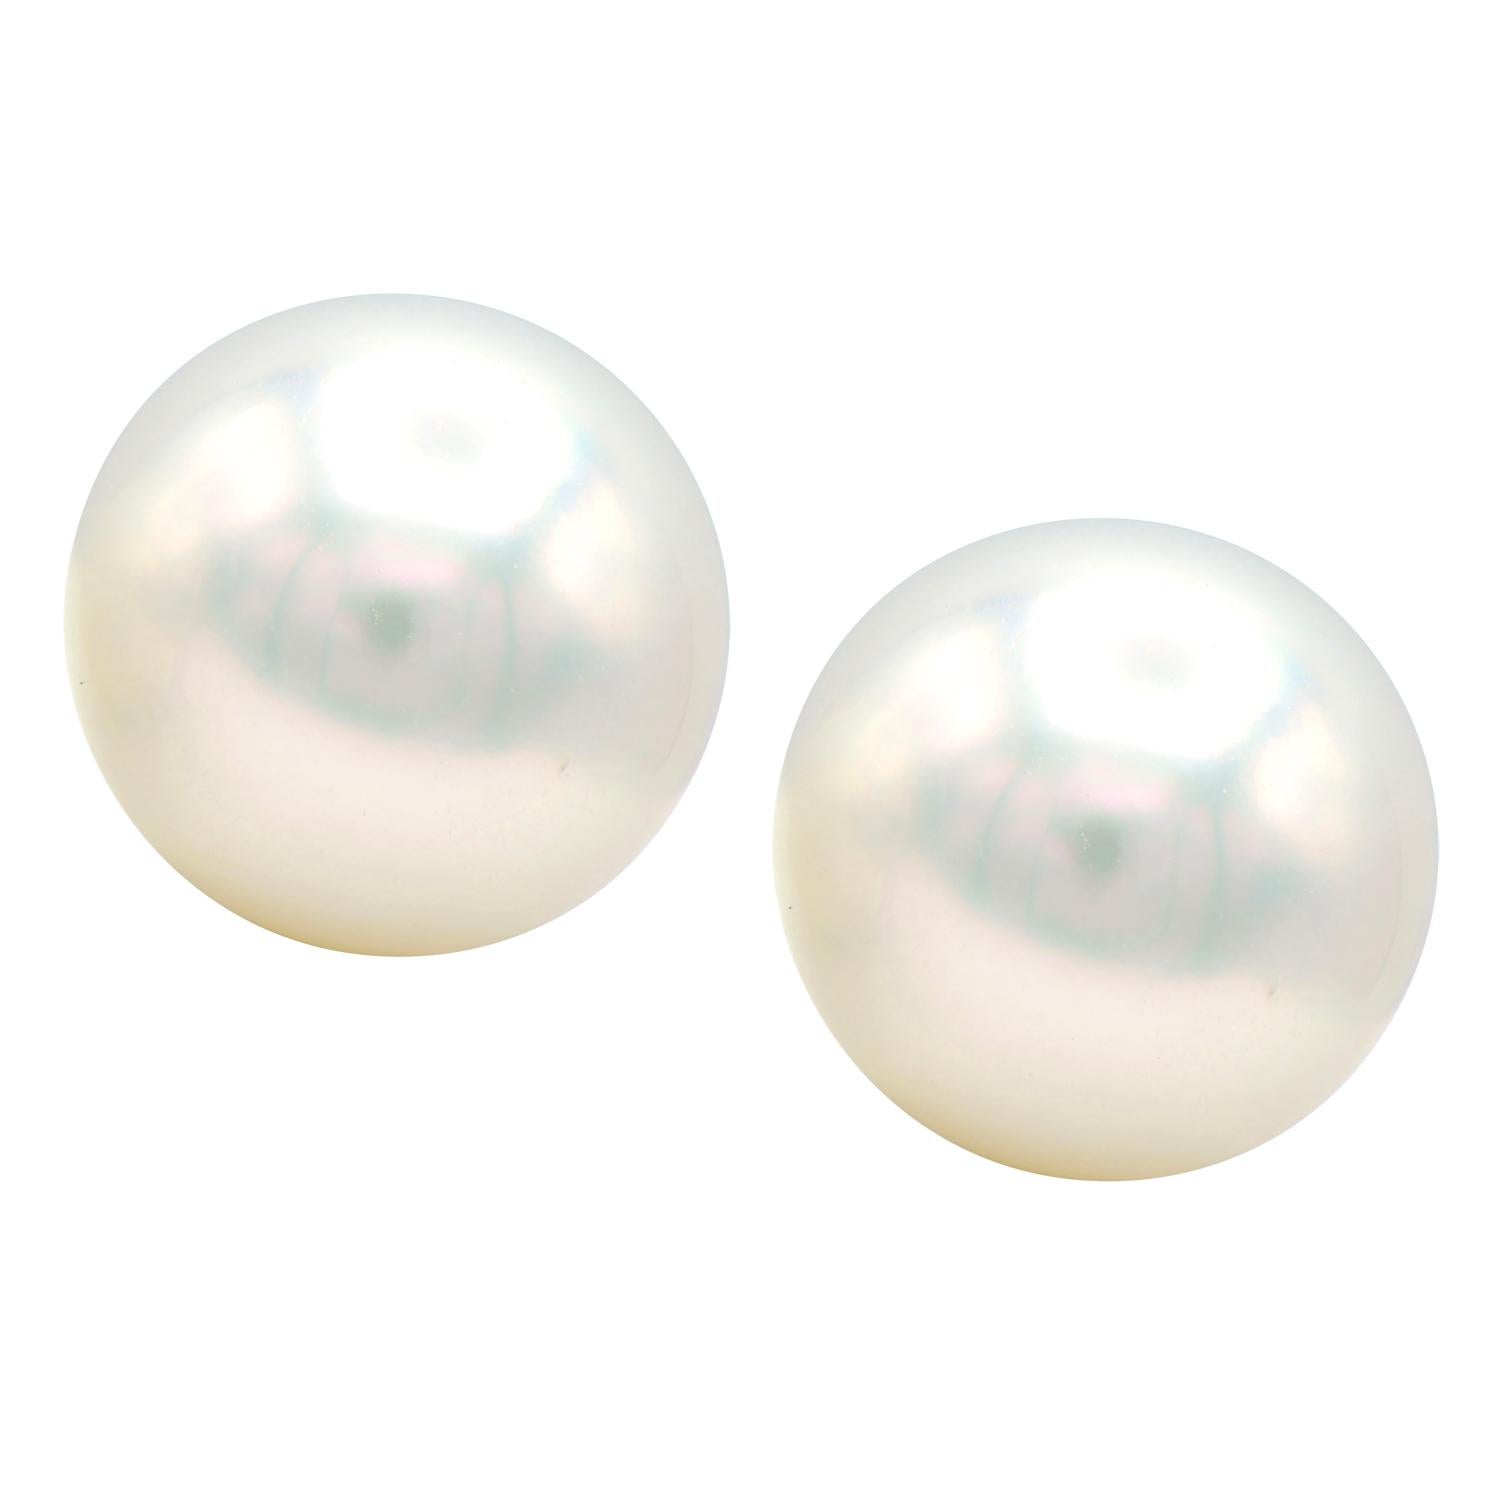 South Sea Pearl Stud Earrings are a classic and timeless piece of jewelry that should be owned by everyone. South Sea studs are slightly larger than cultured pearl studs for a bigger more sophisticated look. These 9.5-10mm South Sea Pearl Studs are